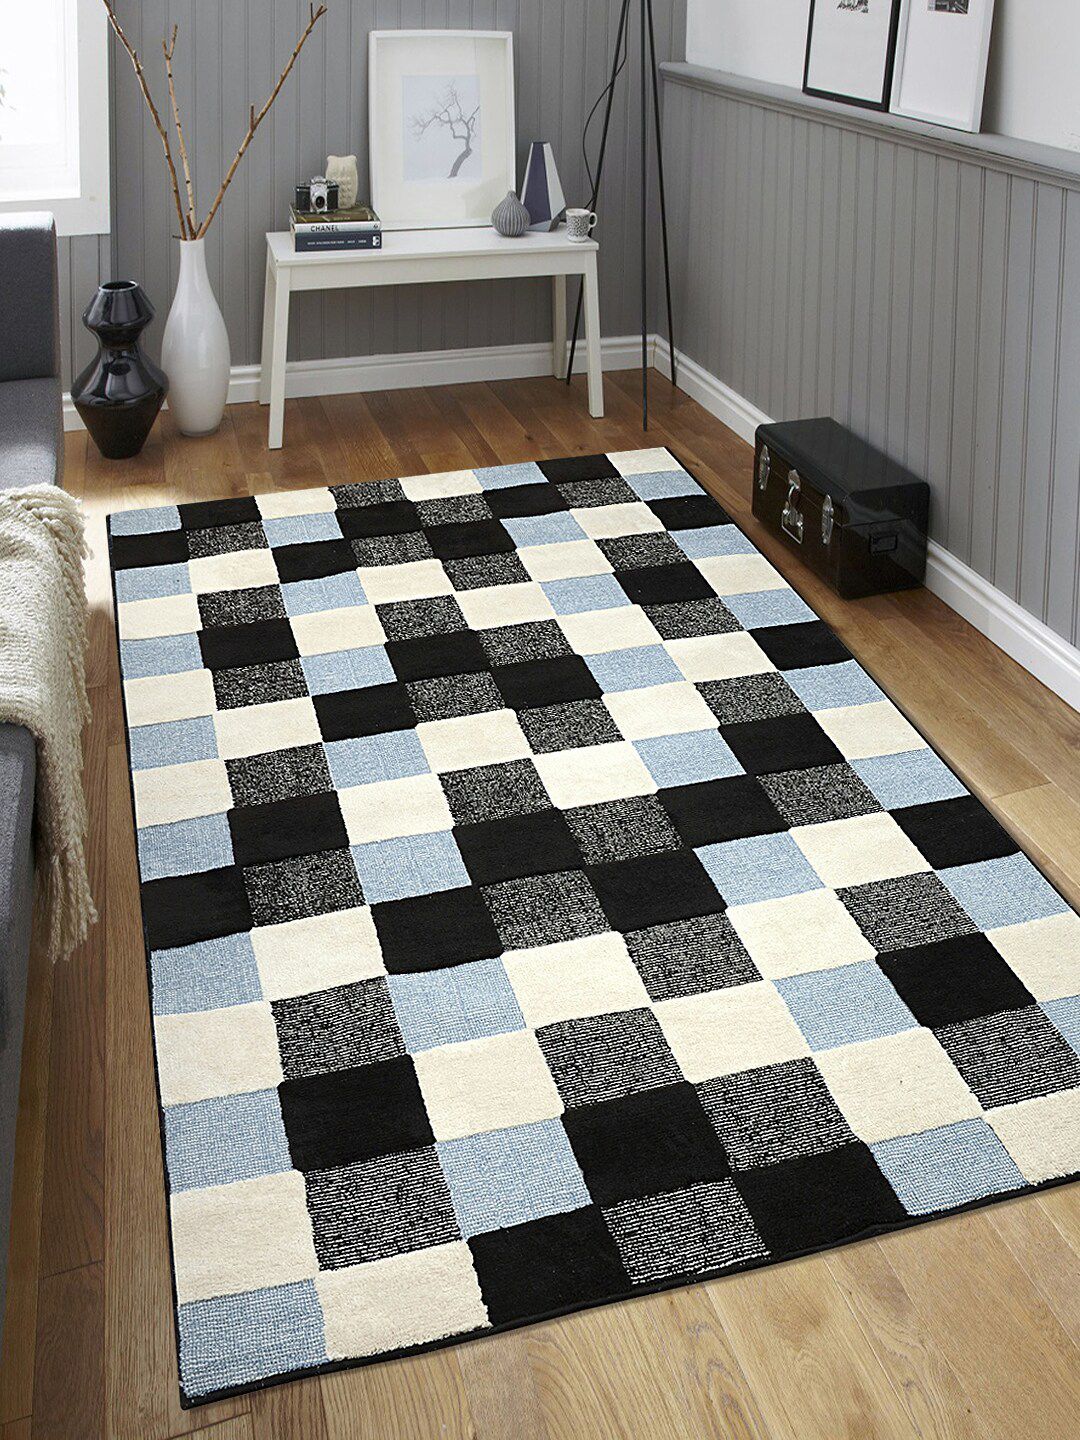 Saral Home Black & Turquoise Blue Checked Microfiber Anti-Skid Carpet Price in India